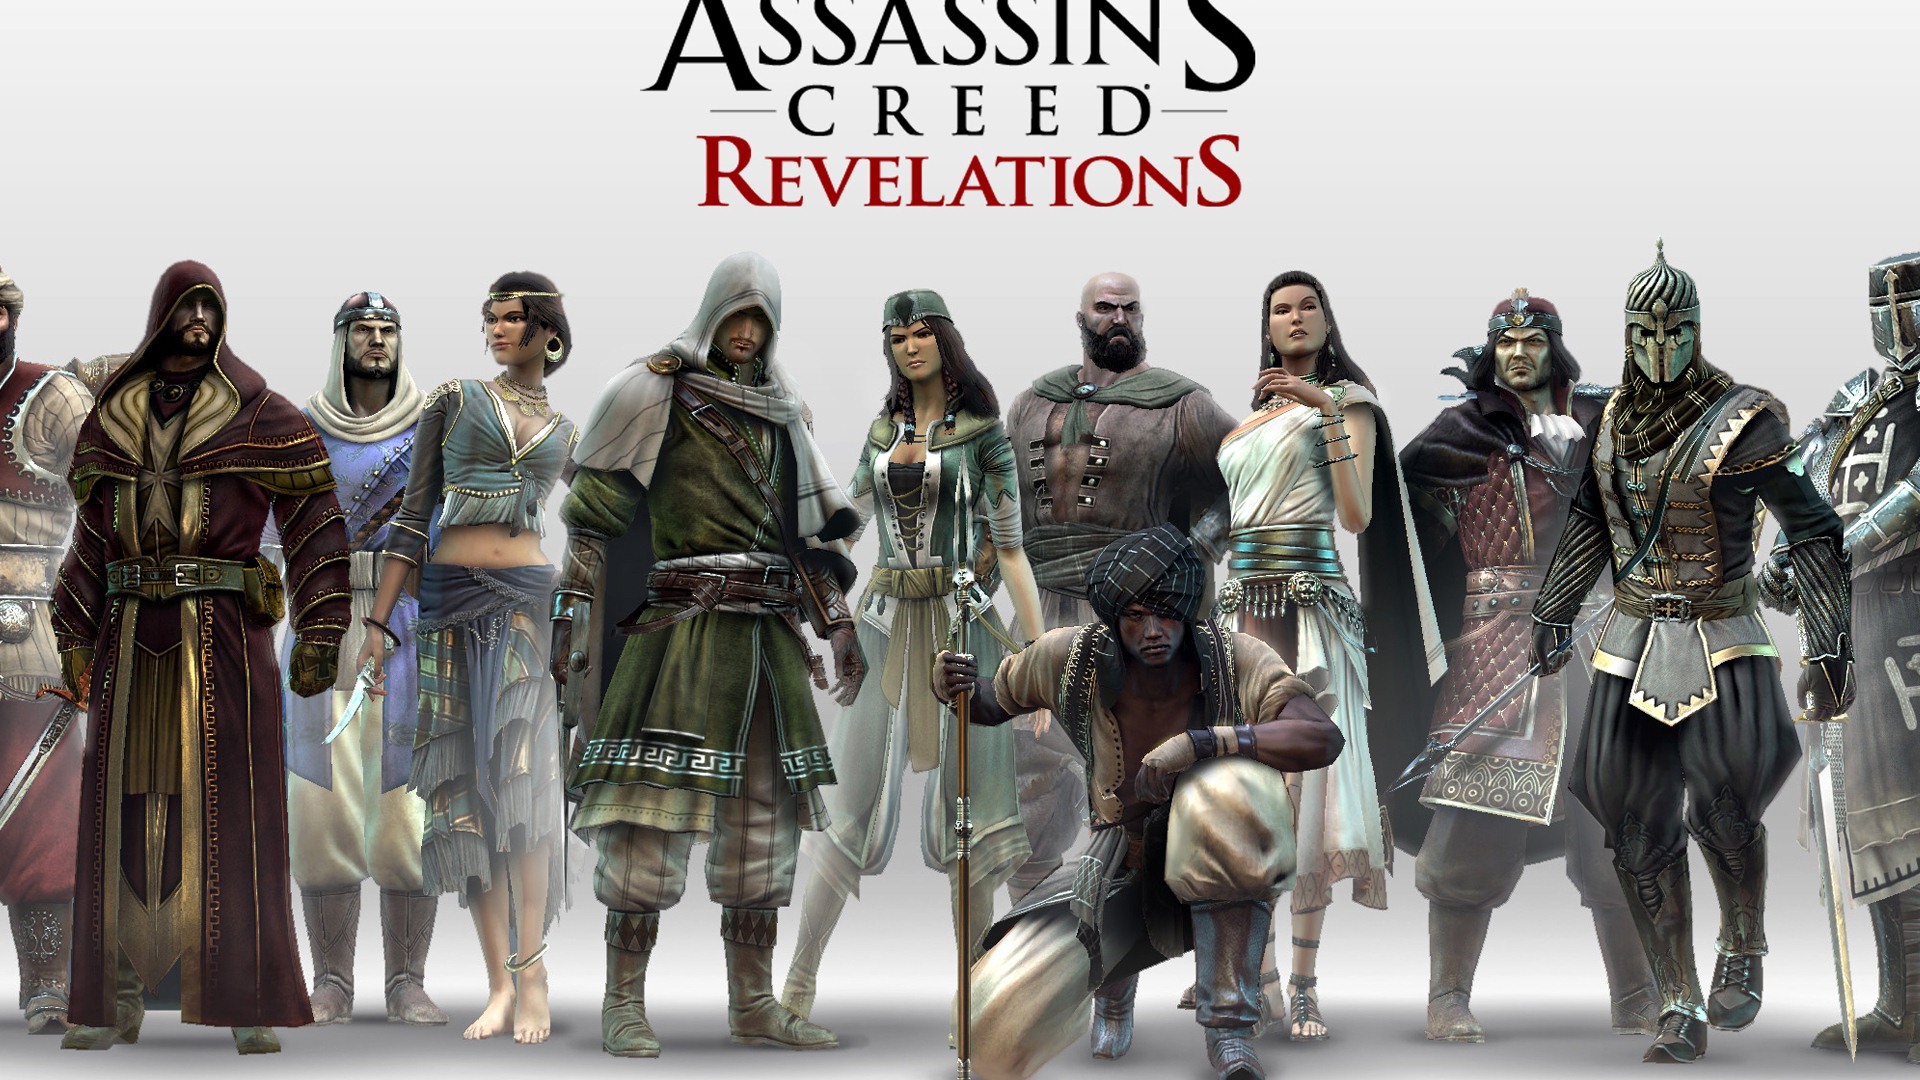 Assassin's Creed: Revelations HD wallpapers #27 - 1920x1080